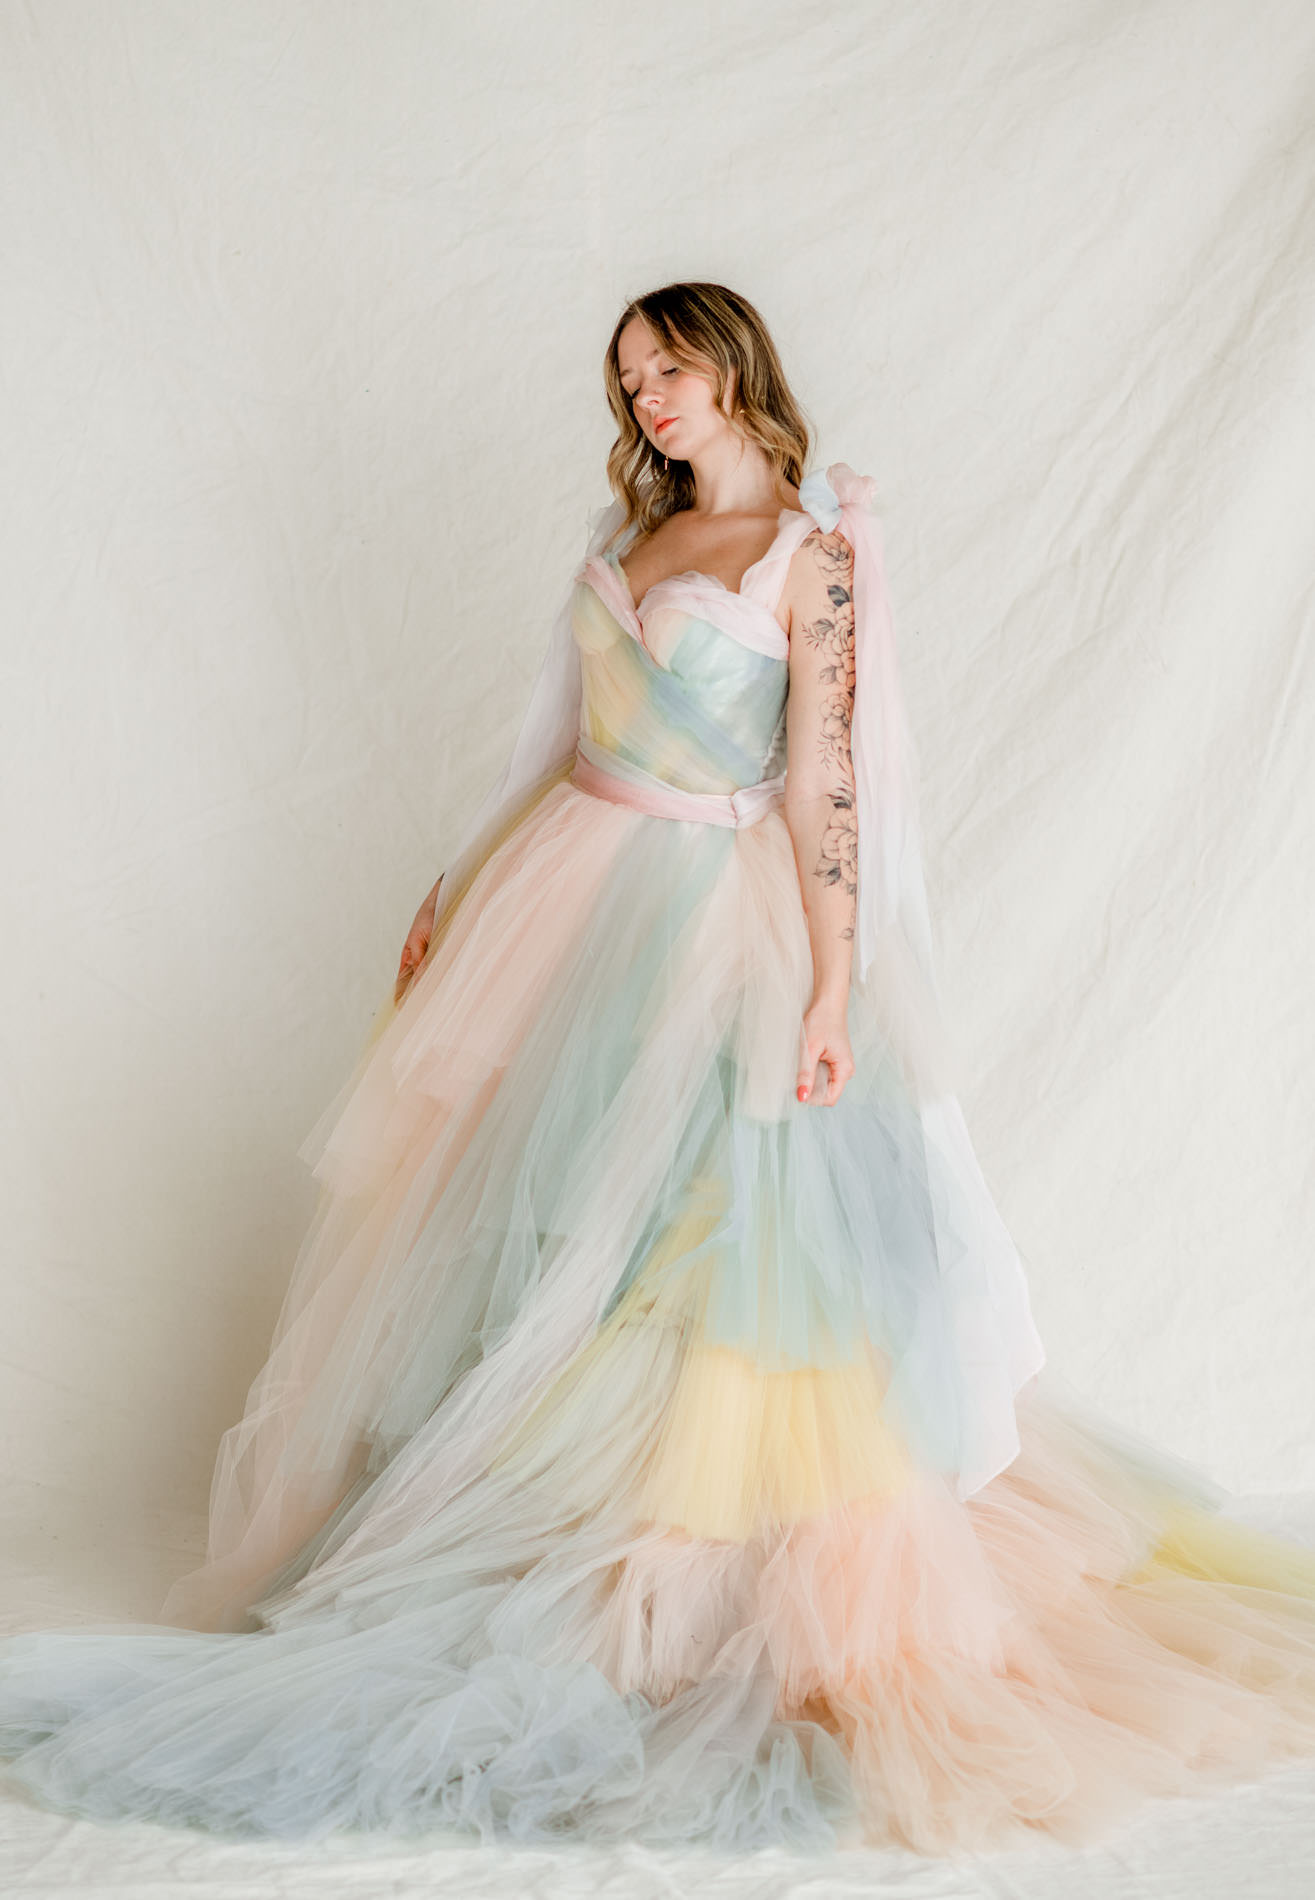 Styled Editorial Shoot gown made with rainbow tulle and silk by Dress Rental company Rented by Claire LaFaye_Candy Crush 1